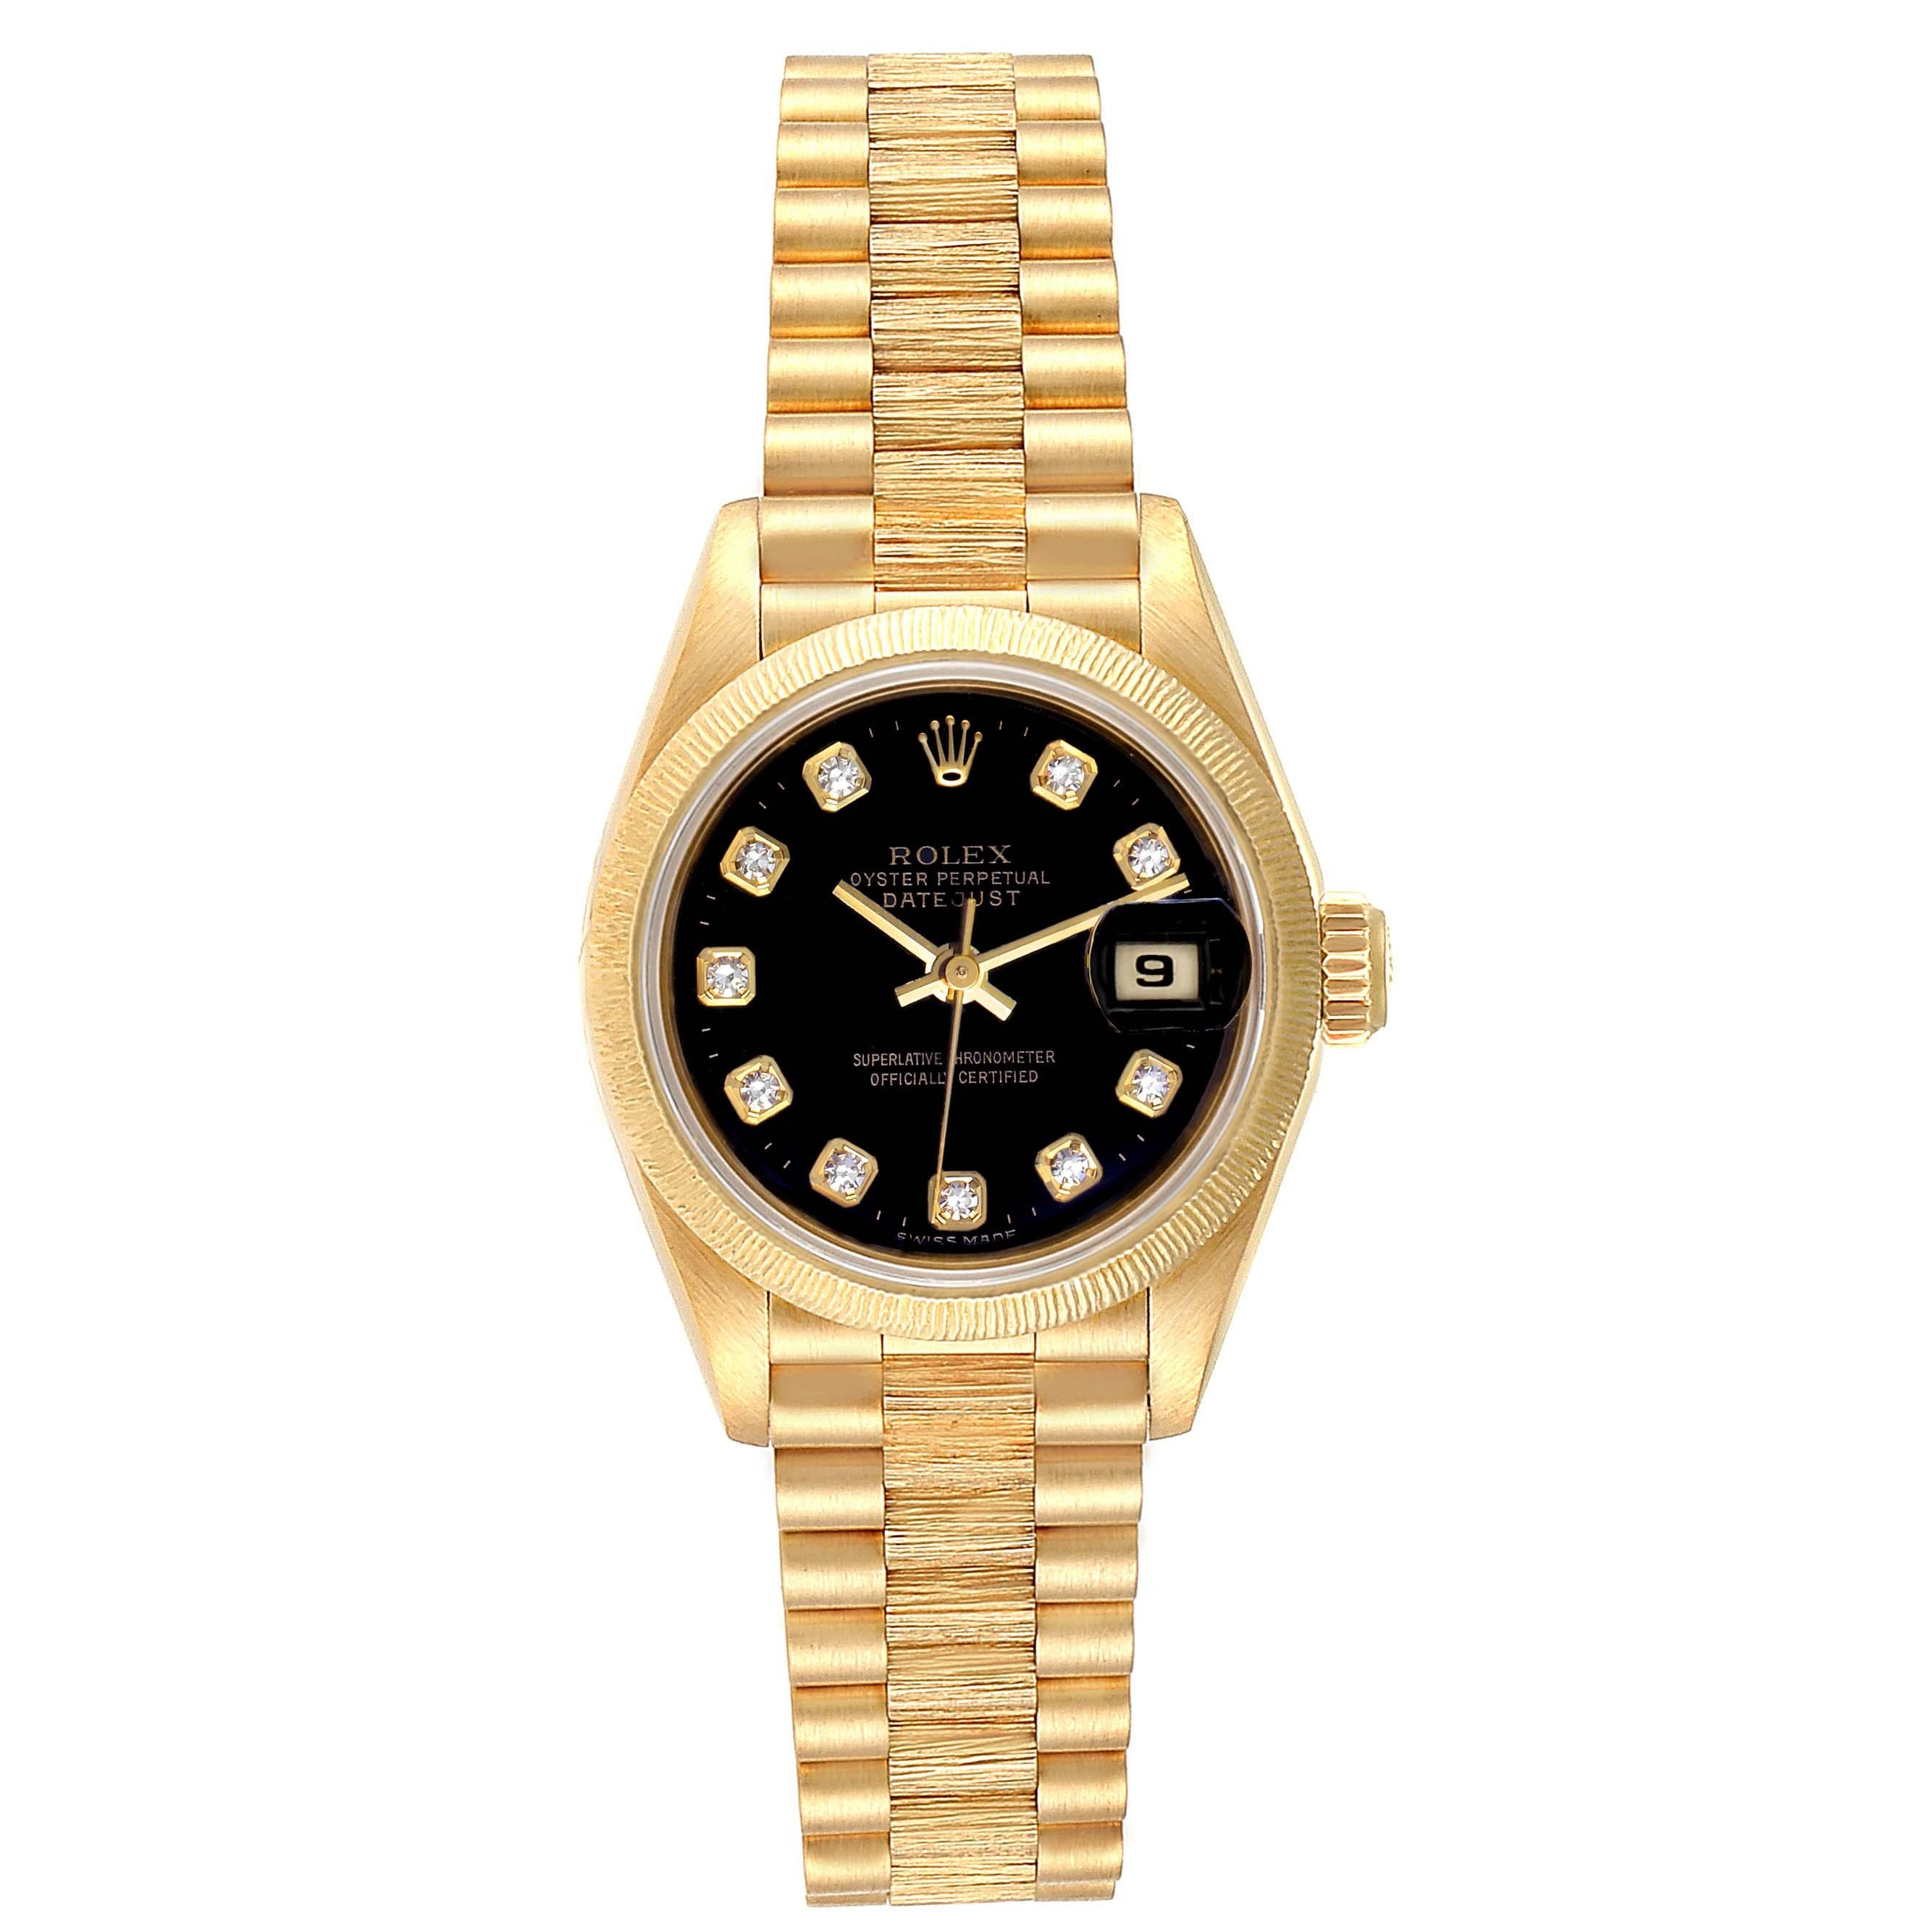 Rolex President Datejust Yellow Gold Diamond Ladies Watch 69278. Officially certified chronometer self-winding movement. 18k yellow gold oyster case 26.0 mm in diameter. Rolex logo on a crown. 18k yellow gold engine turned bezel. Scratch resistant